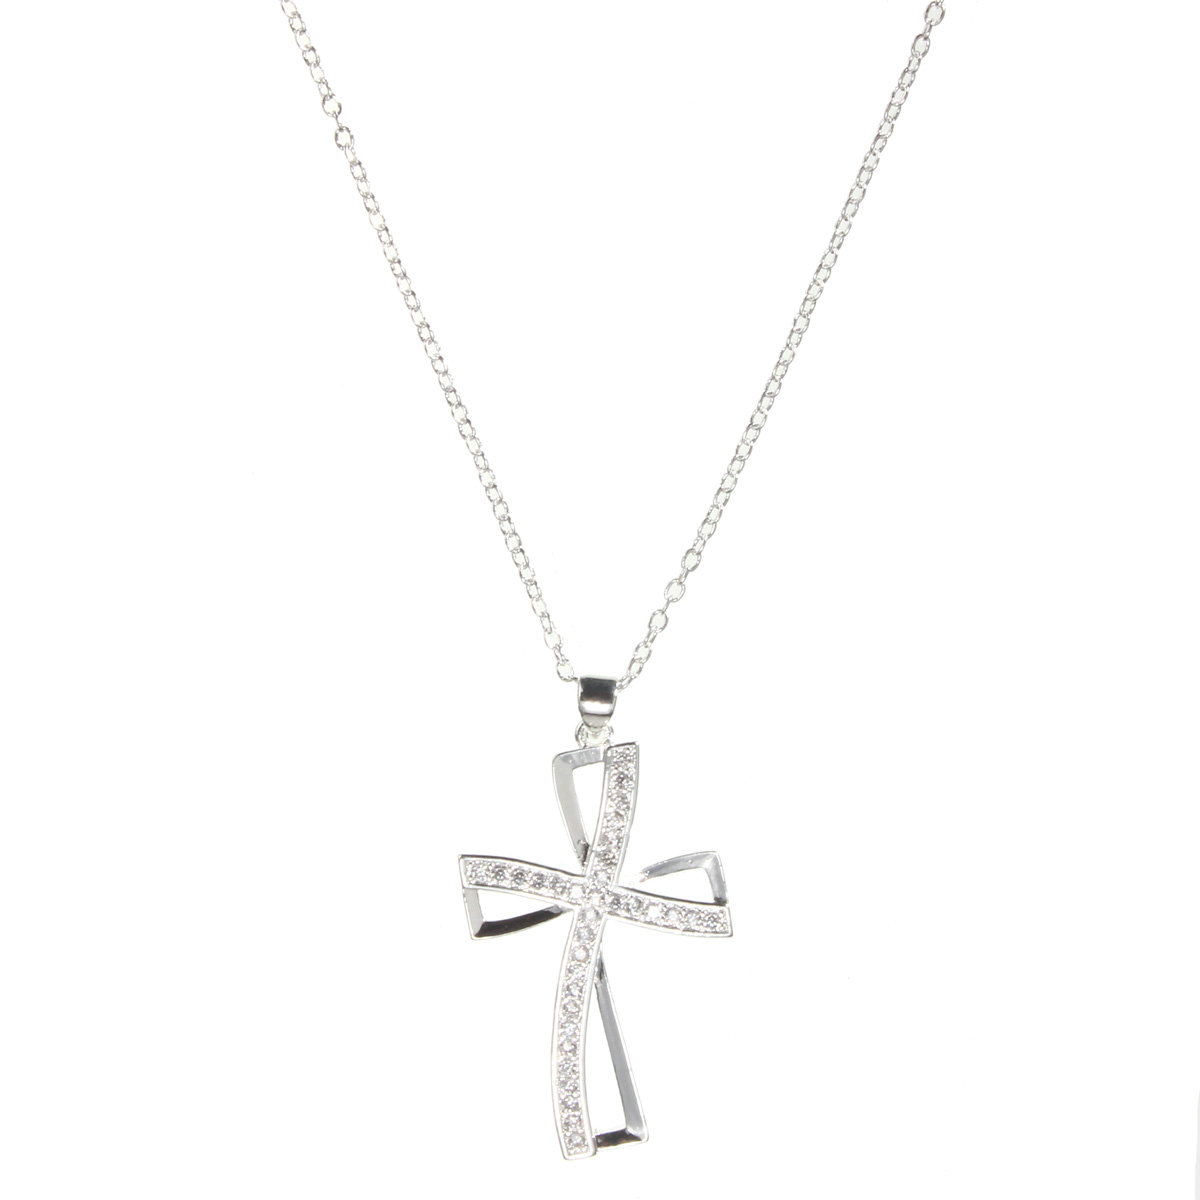 925 Silver Plated Hollow Cross Crystal Necklace Gift For Her